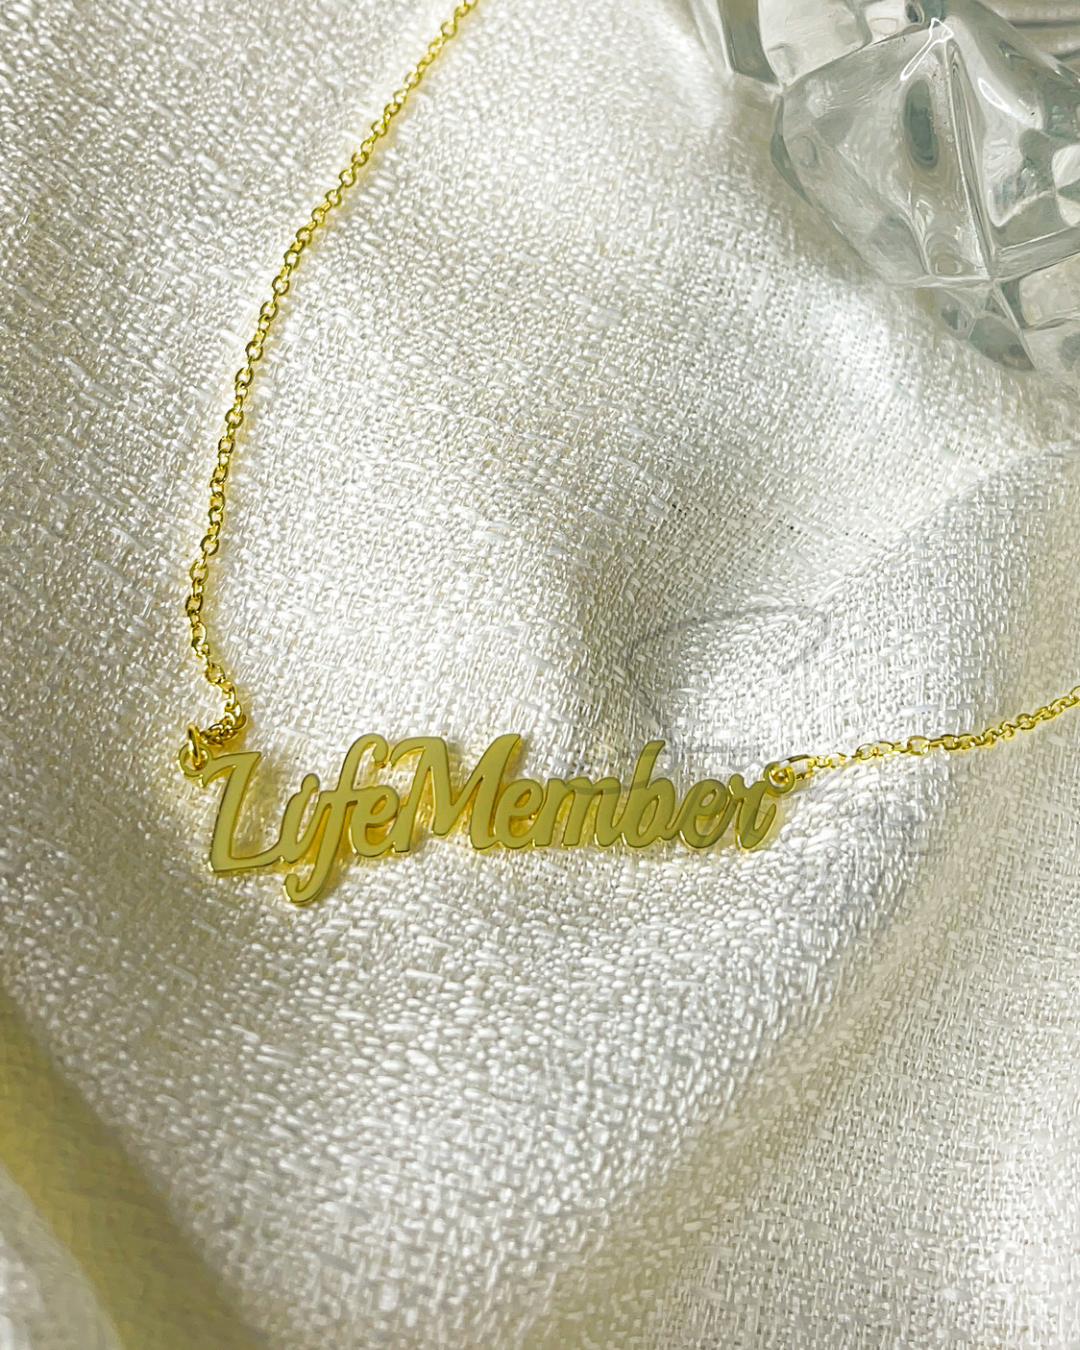 Life Member Necklace